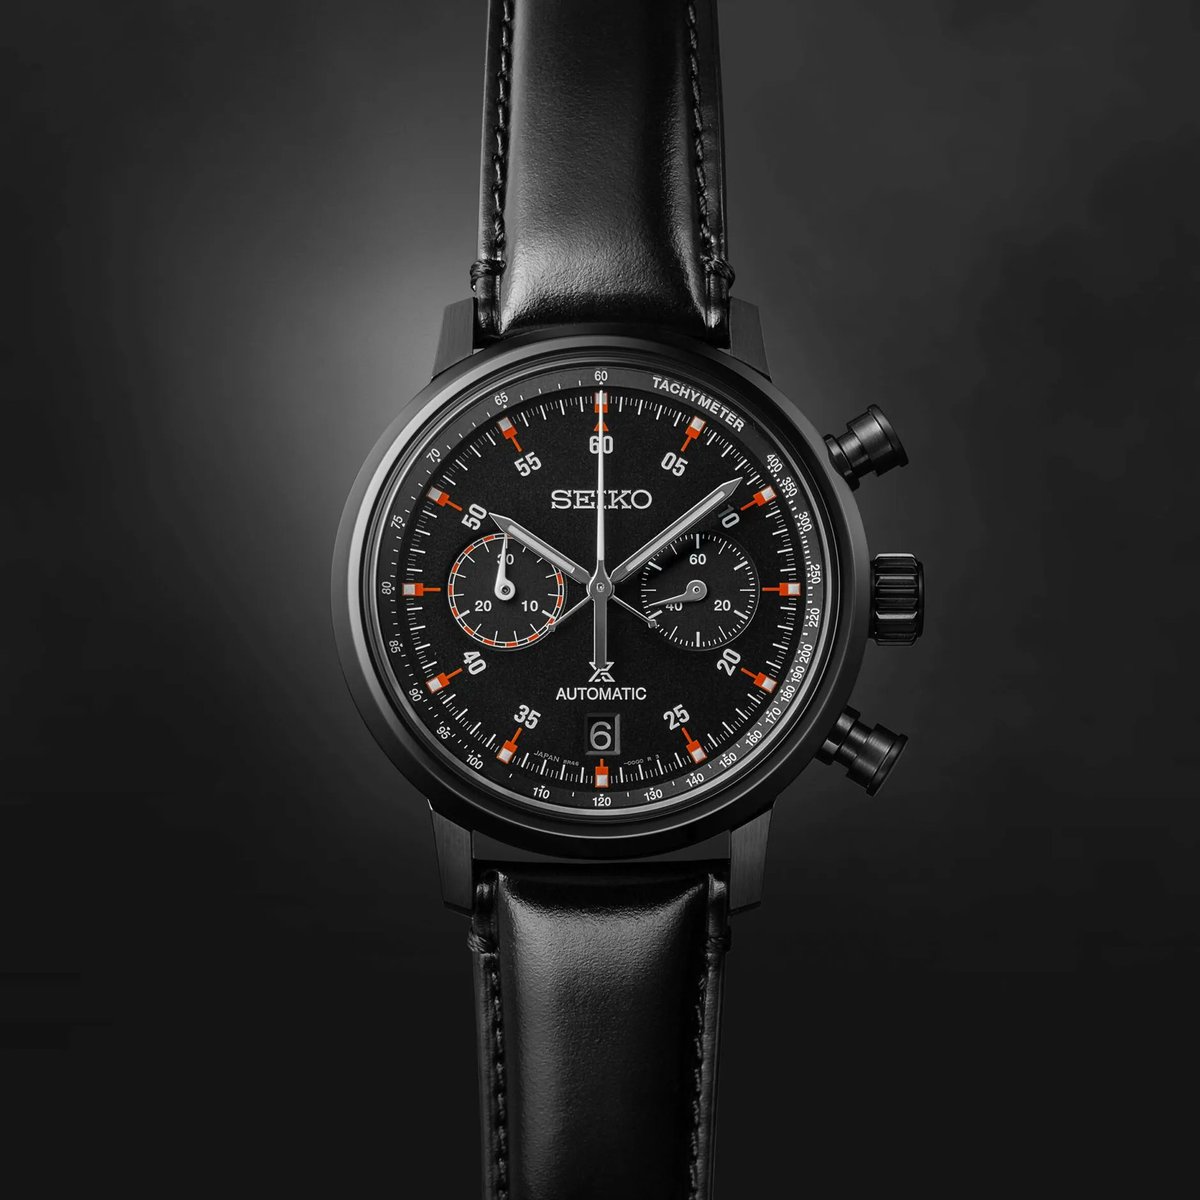 Seiko is continuing to build out the Prospex collection with the latest all-black Prospex Speedtimer Chronograph Limited Edition SRQ045J1 taking inspiration from the brand’s first stopwatch designed in 1972.

#Seiko #SeikoProspex 

watchtime.com/wristwatch-ind…